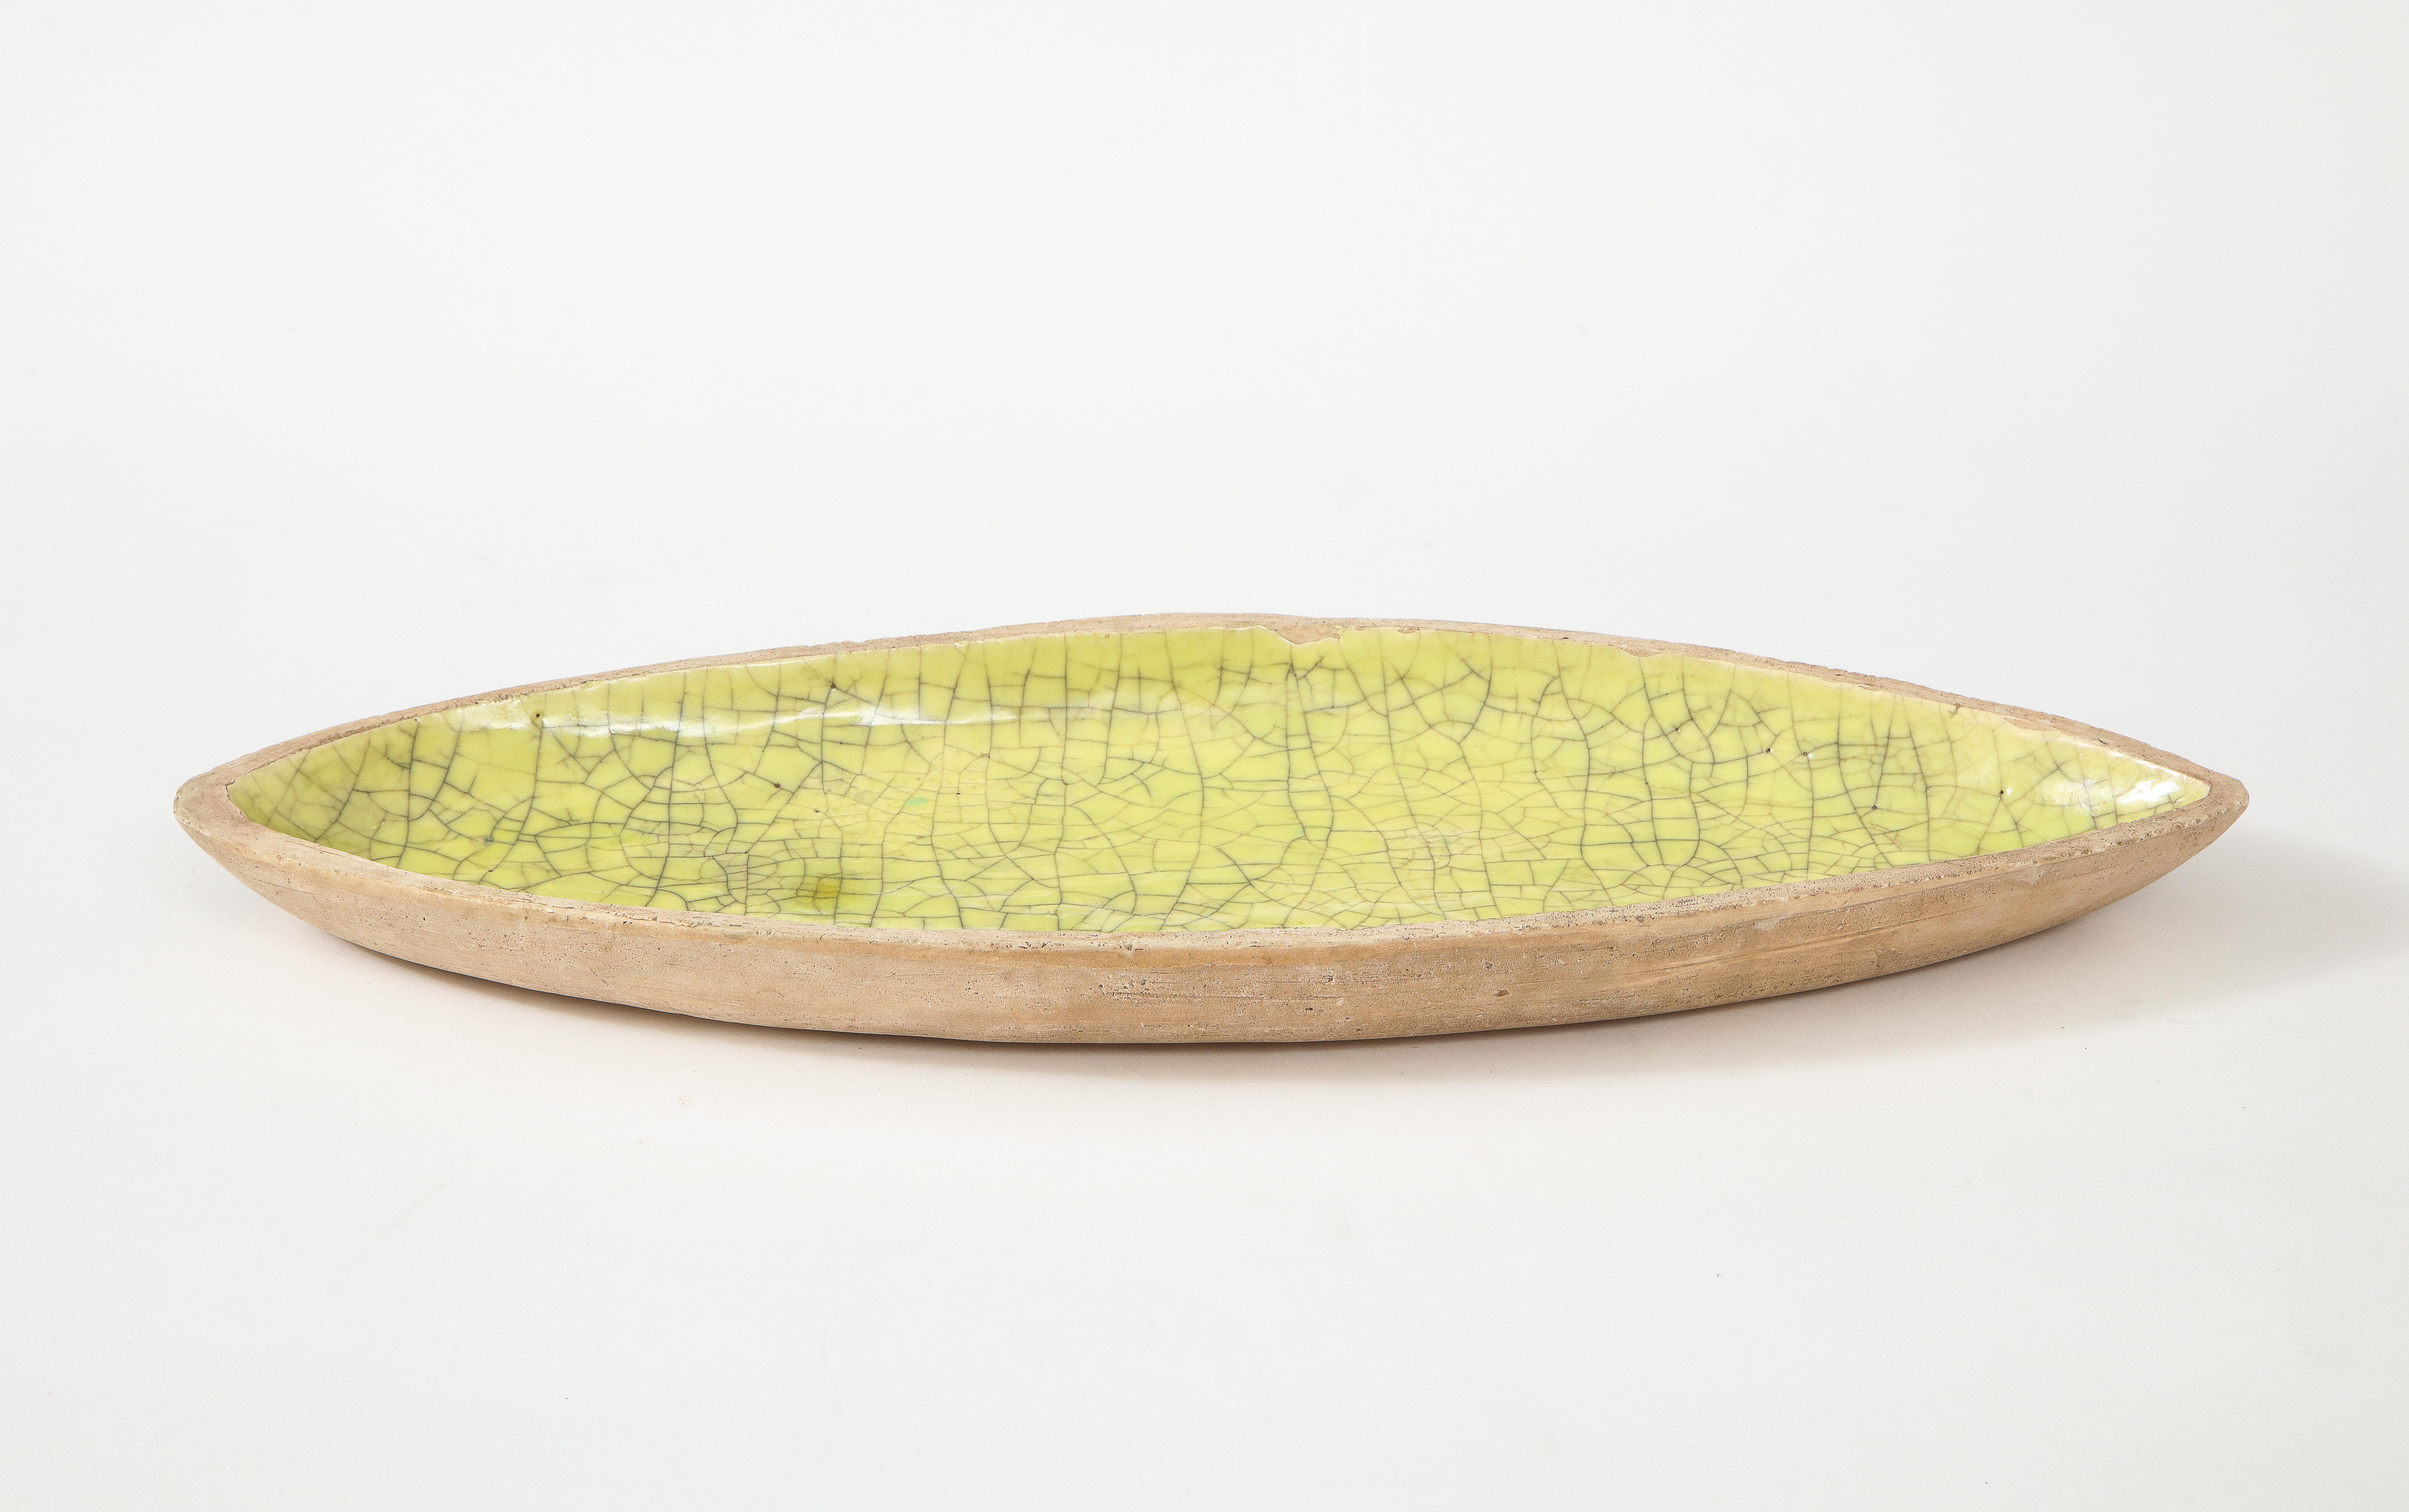 Glazed ceramic plate by Barbara Willis. 

Willis was known for bright, organically shaped studio ceramics in crackling glazes; a respected figure in the midcentury Californian ceramics Community.